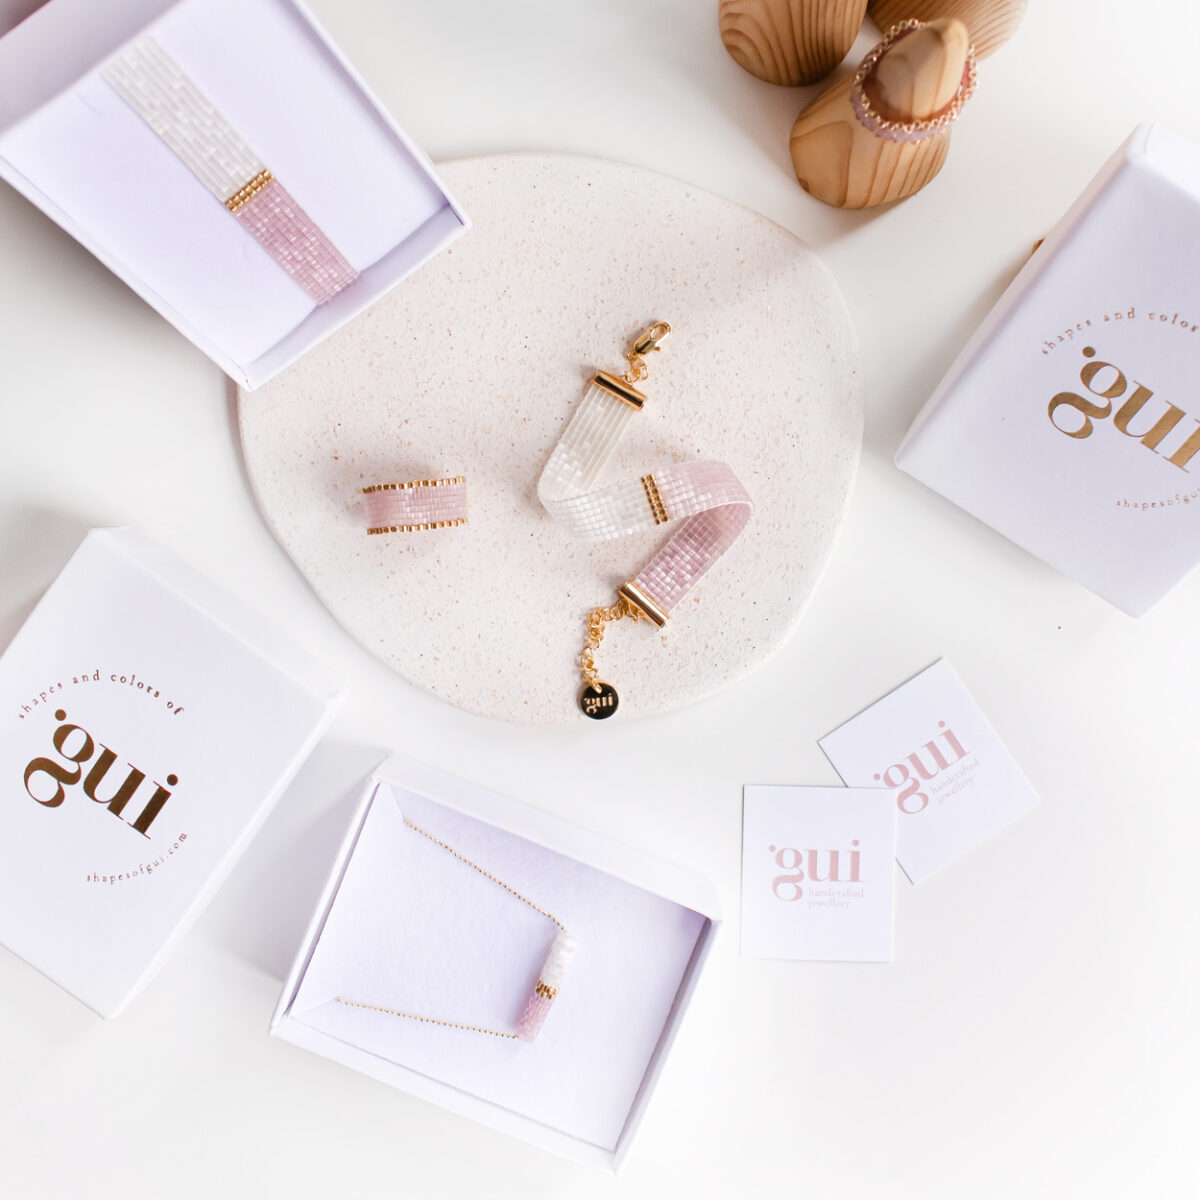 Elegant jewelry pieces displayed on a marble plate with branded packaging around.